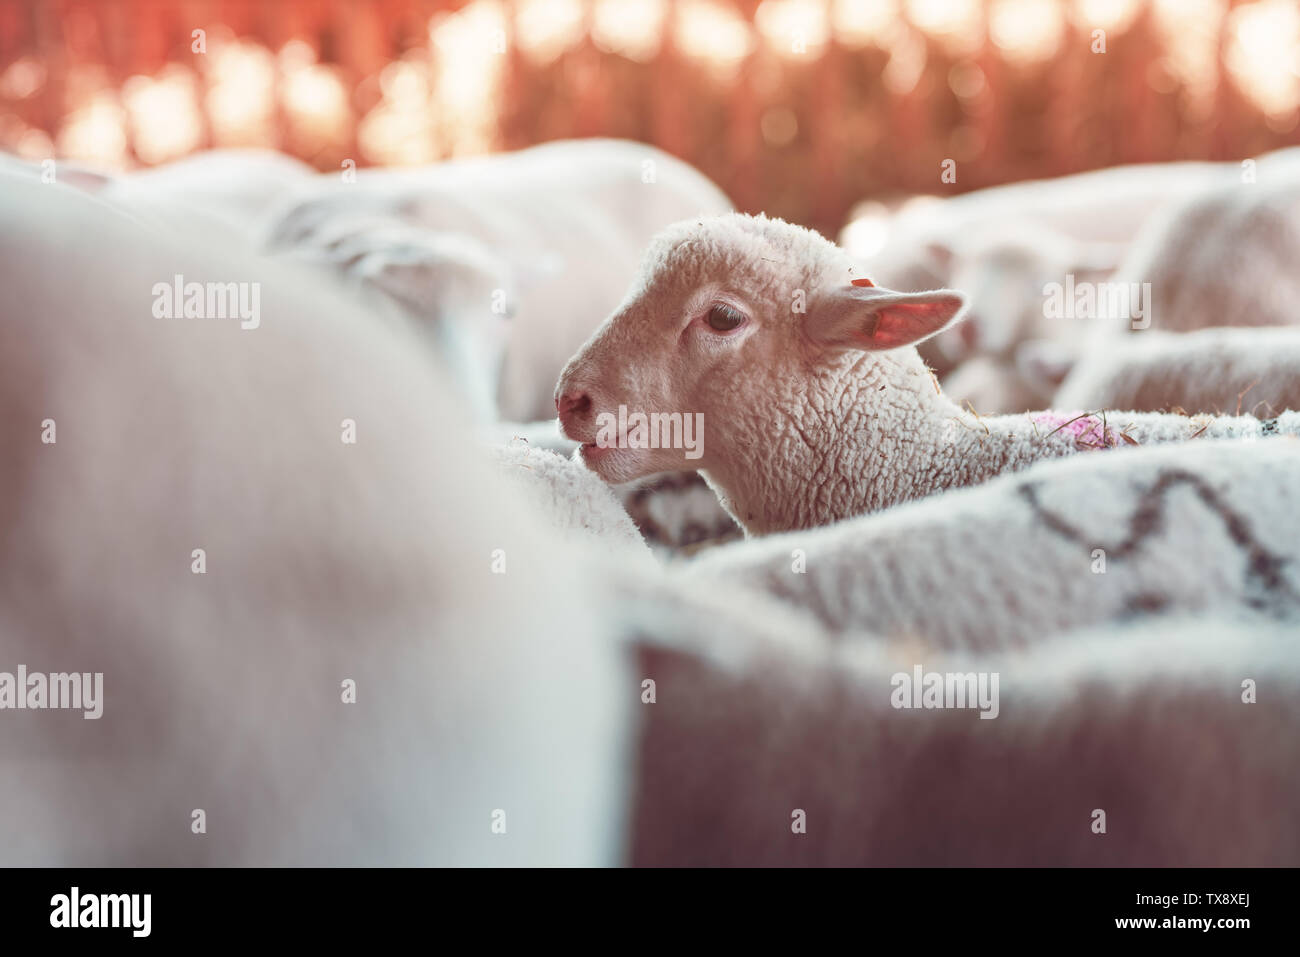 Lamb in sheep pen on dairy farm, cute young animals in paddock Stock Photo